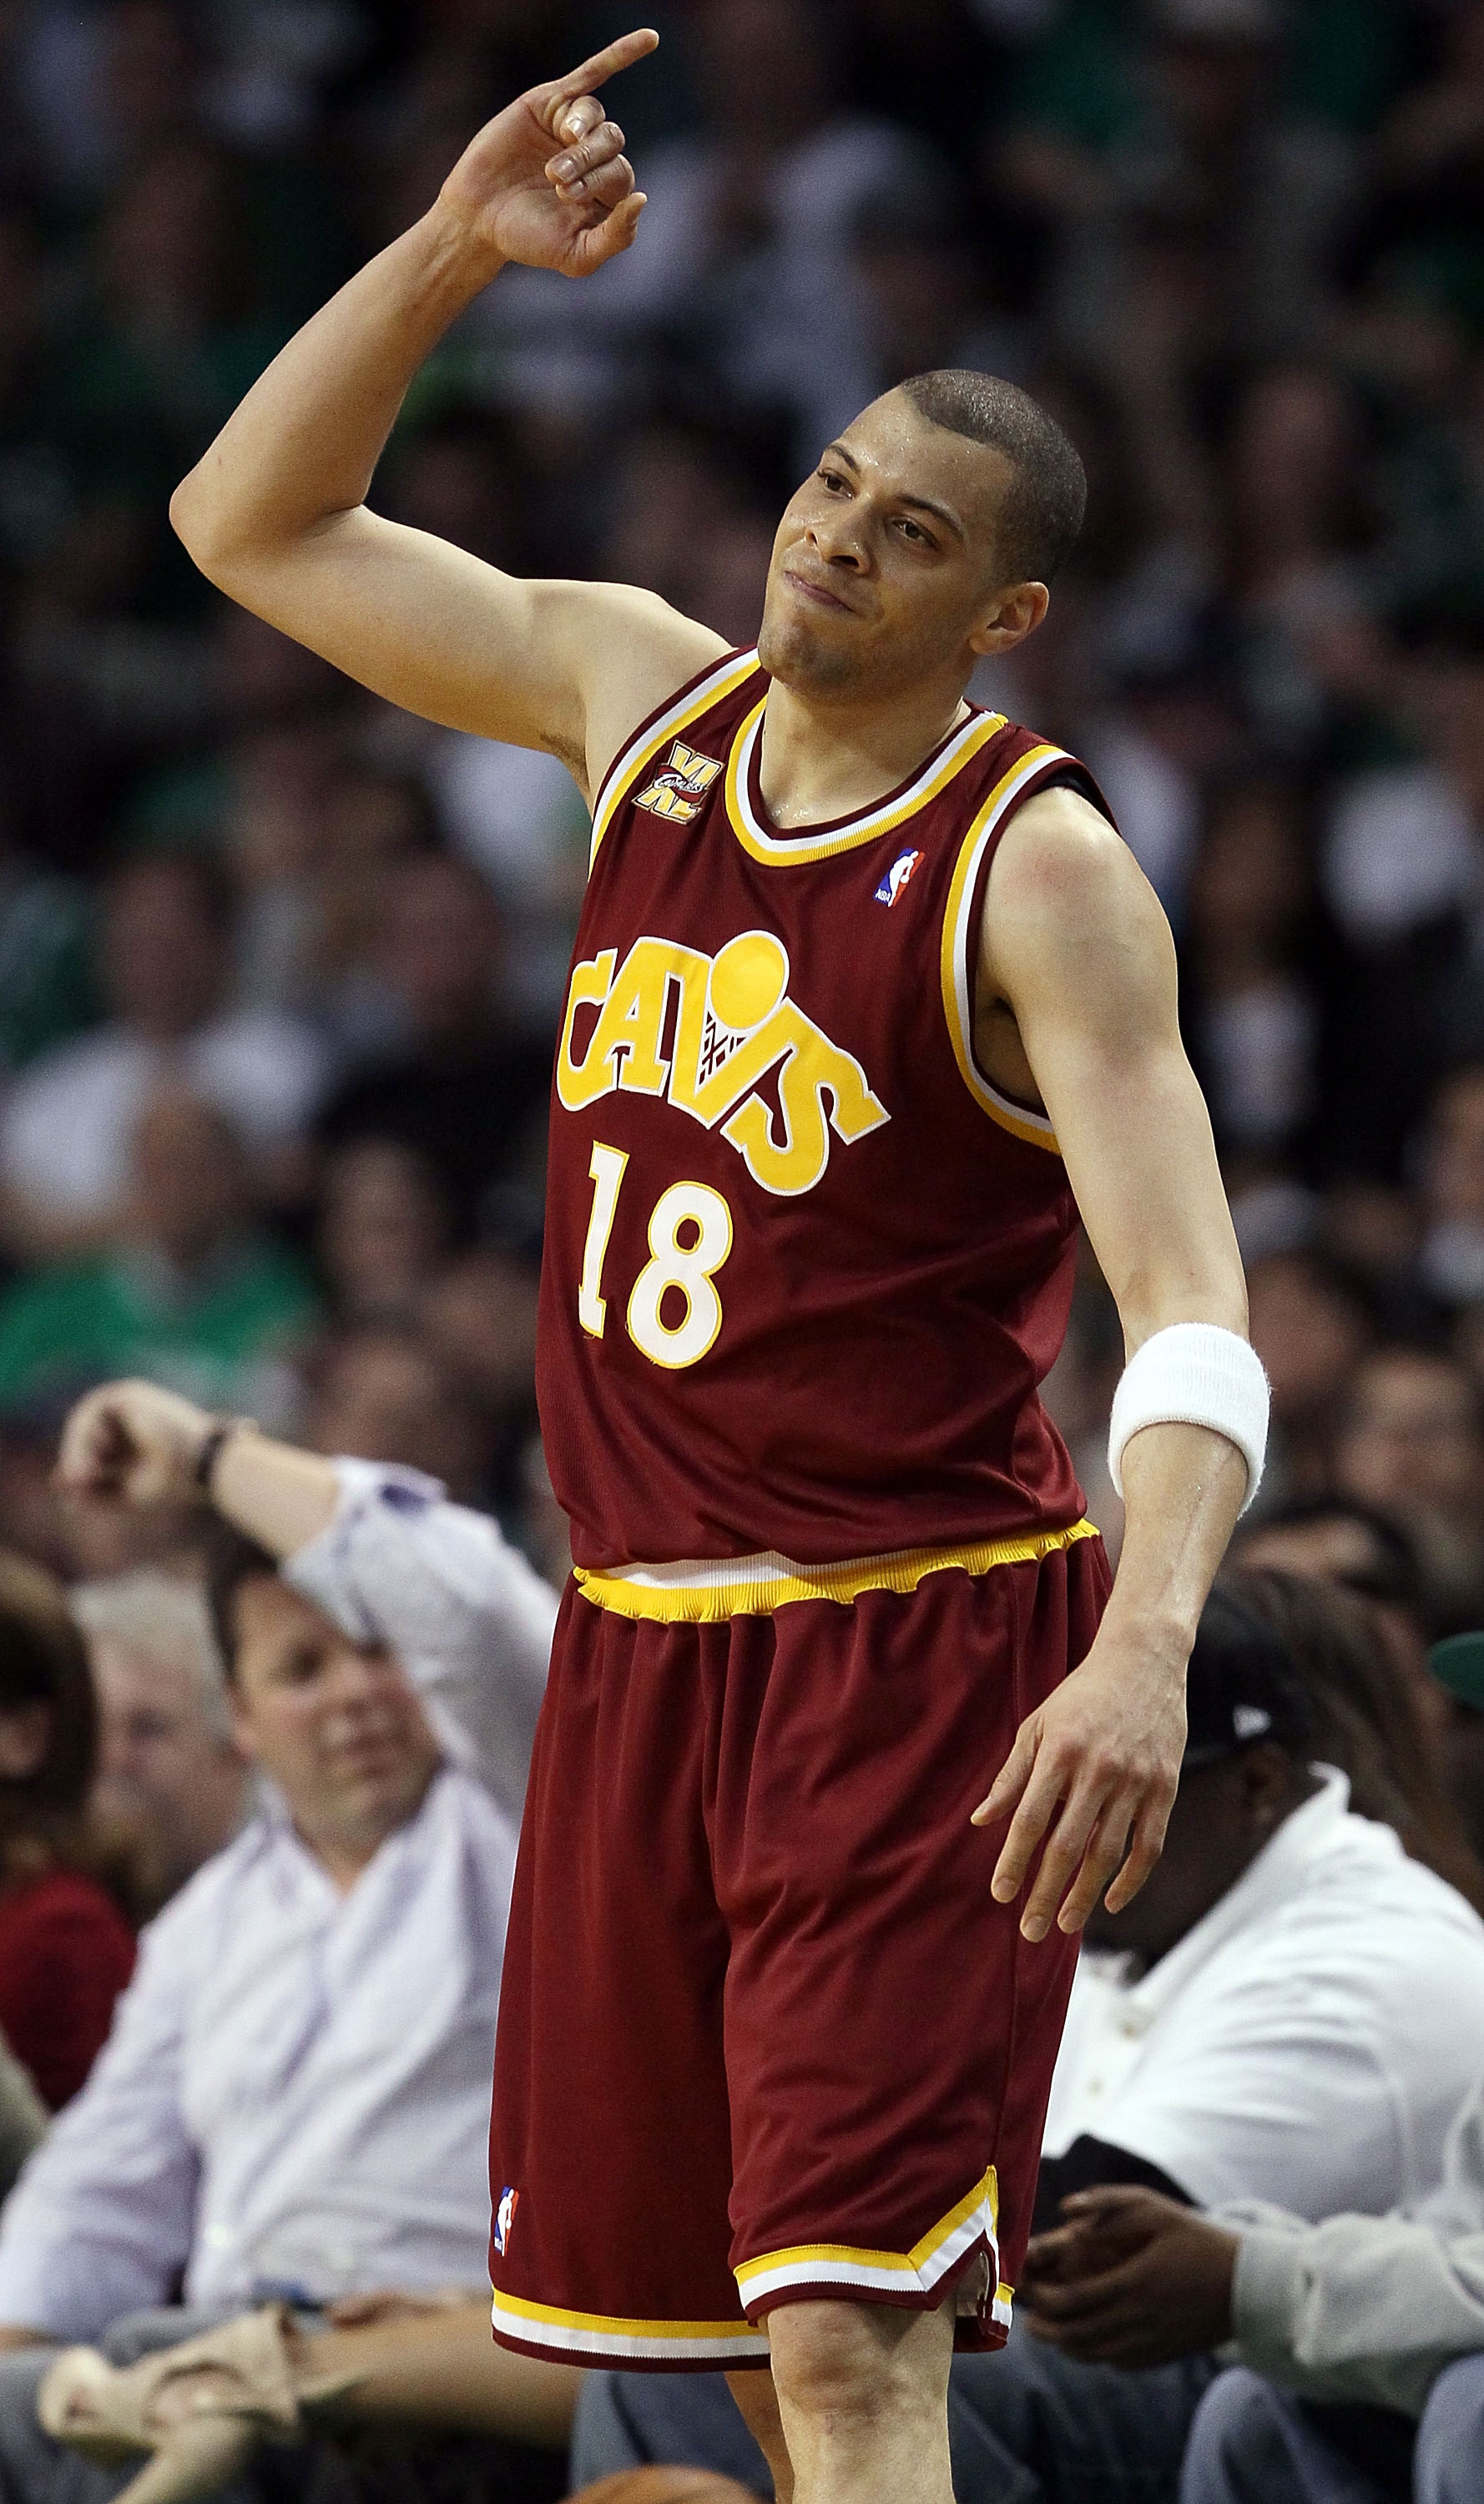 BOSTON - MAY 09:  Anthony Parker #18 of the Cleveland Cavaliers reacts after the ball is called out of bounds on him in the first half against the Boston Celtics during Game Four of the Eastern Conference Semifinals of the 2010 NBA playoffs at TD Garden o